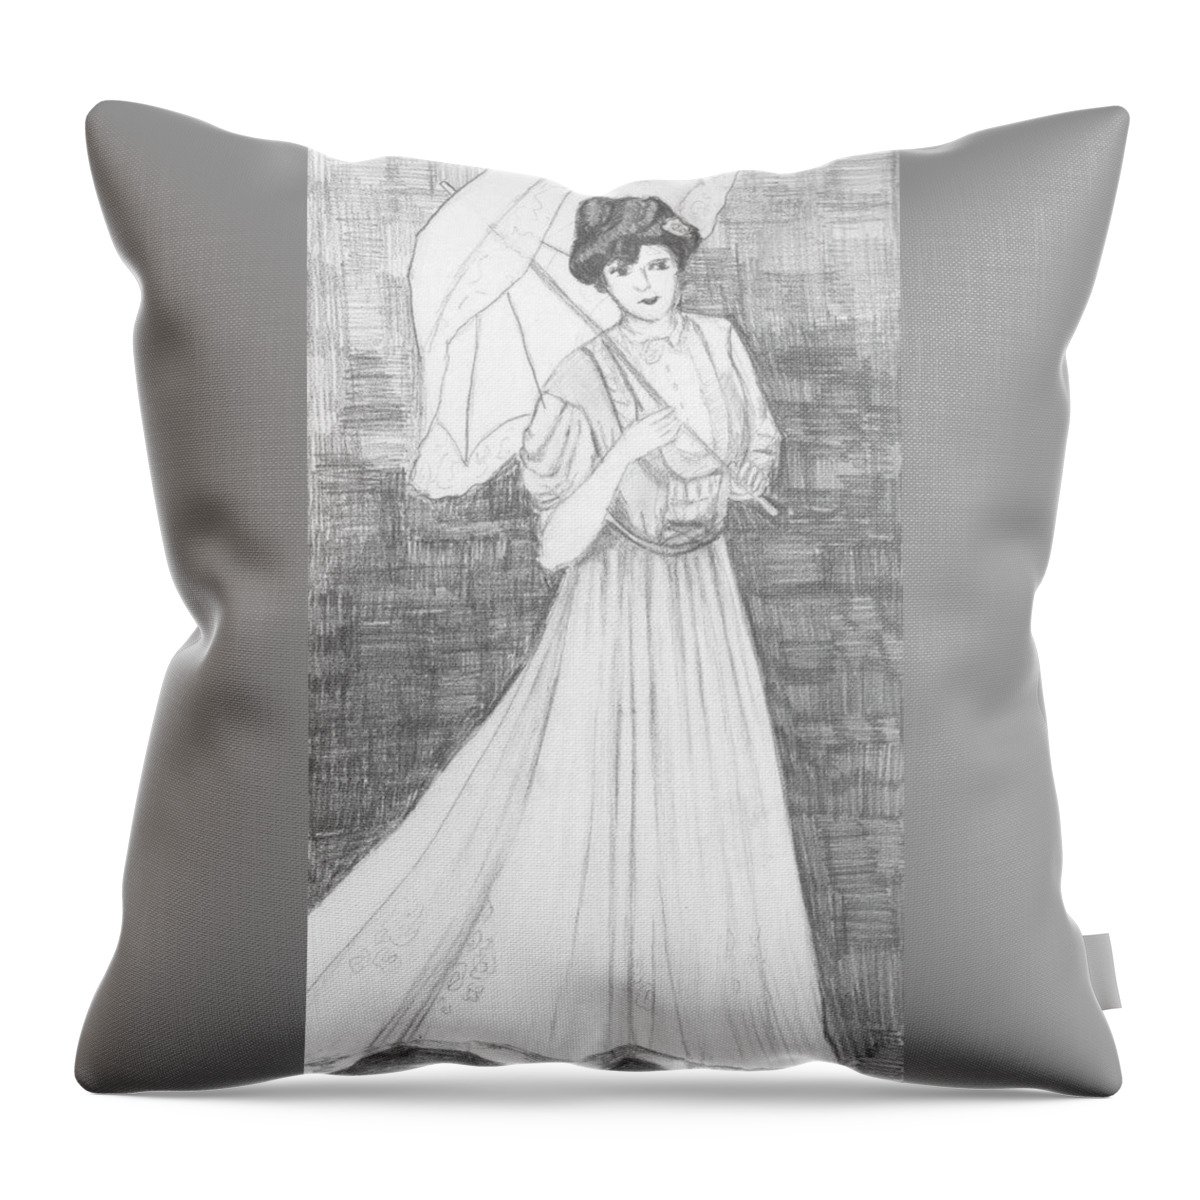  Throw Pillow featuring the drawing Lady with Parasol by Jam Art